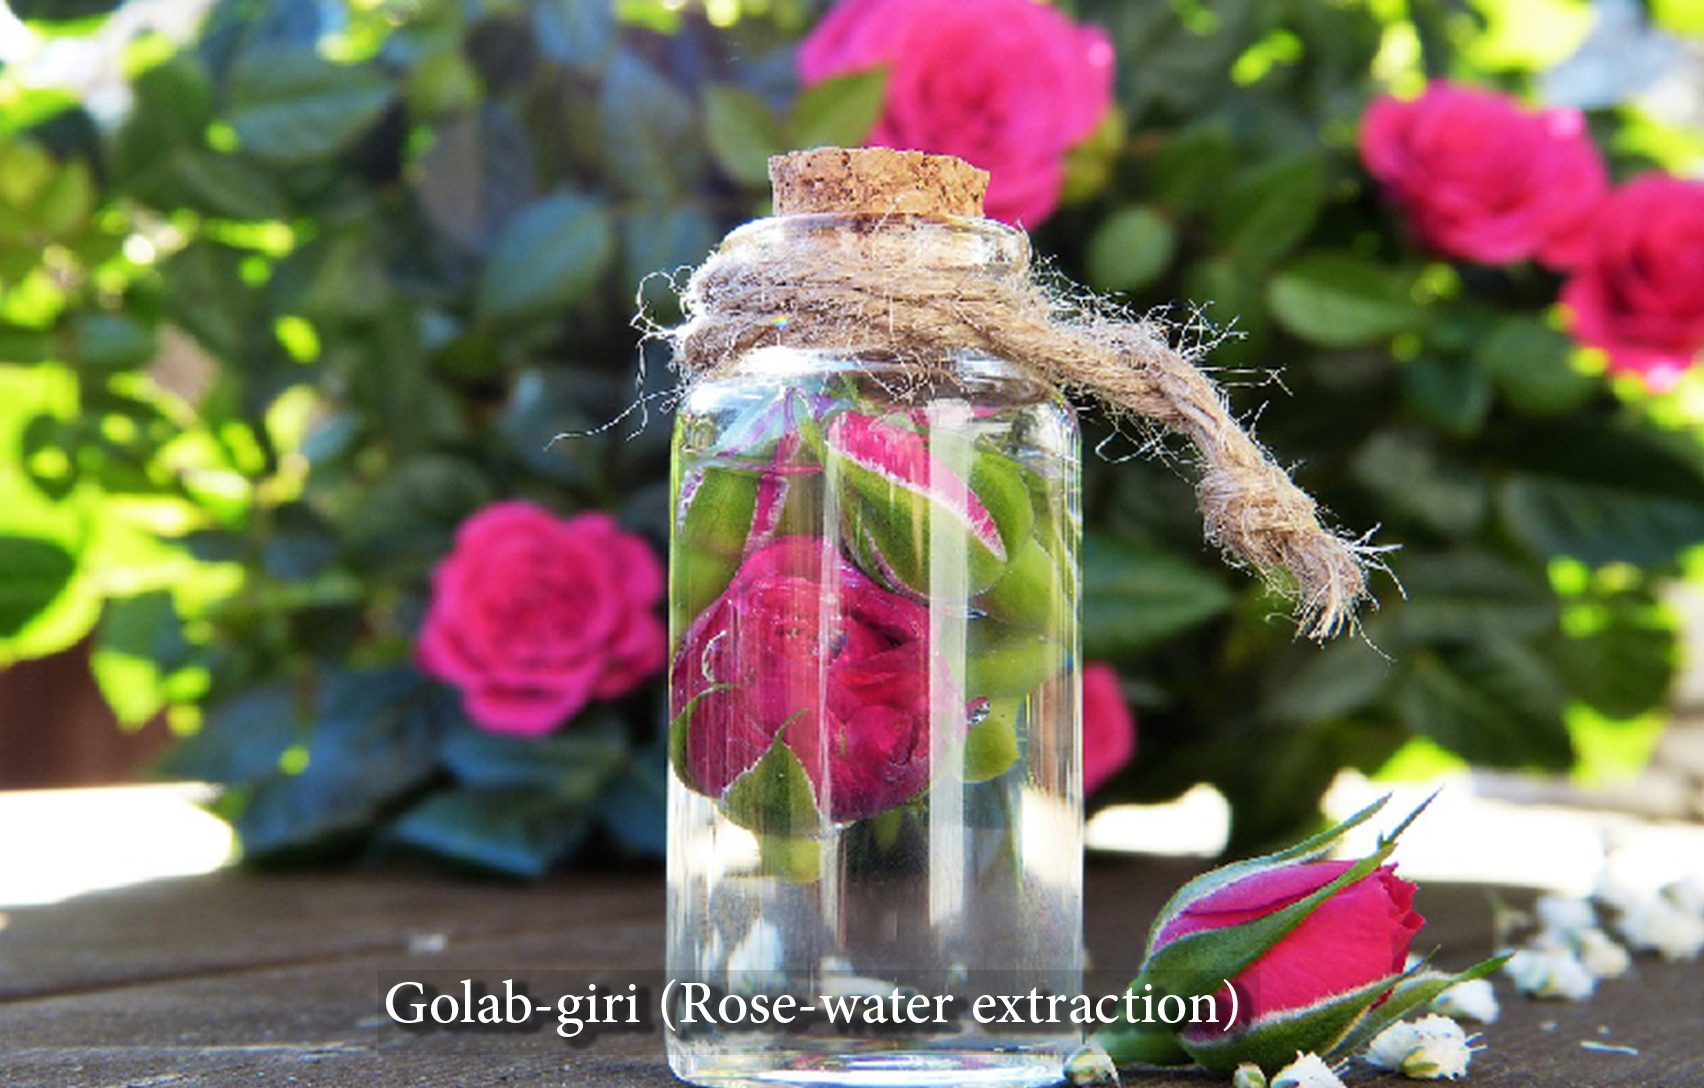 Rose picking and rose-water extraction